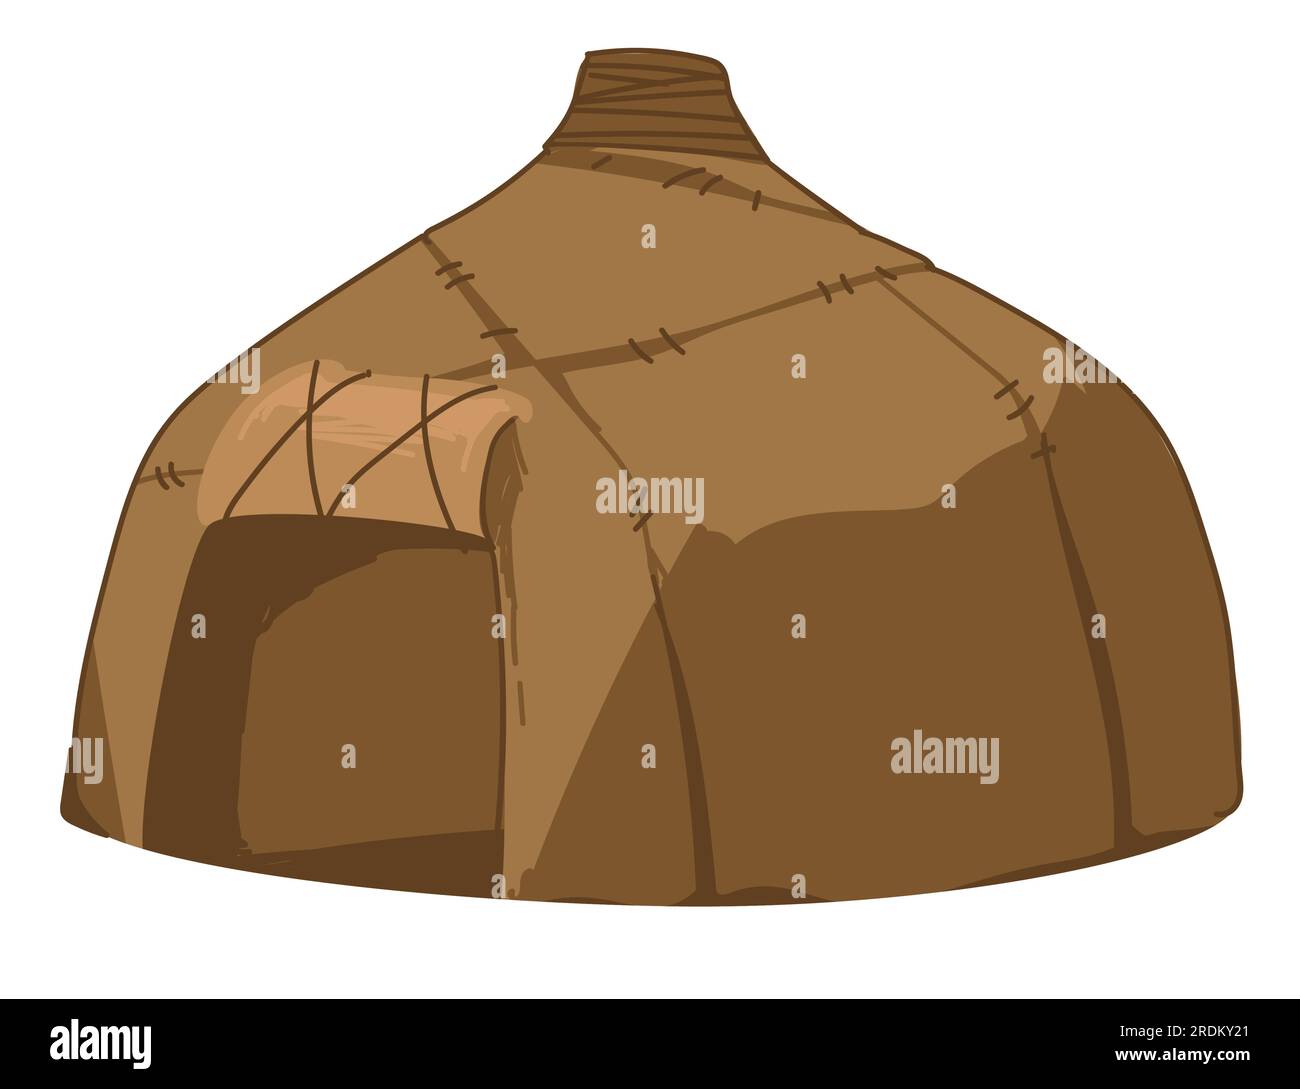 Hut of ancient people, golden horde house shelter Stock Vector